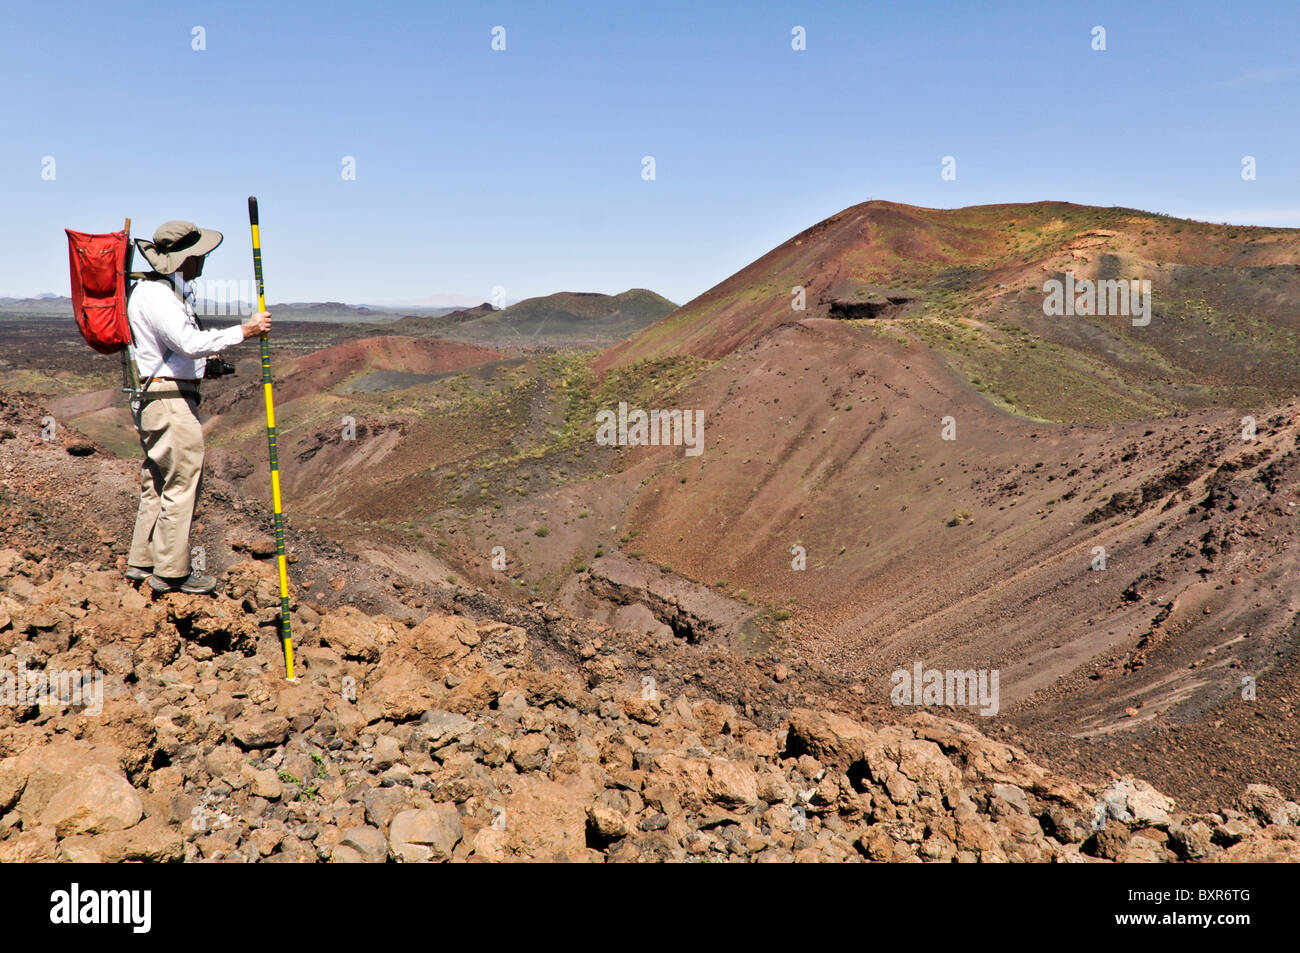 Geologist viewing interior of Tecolote cinder cone, El Pinacate Biosphere Reserve, Sonora, Mexico Stock Photo